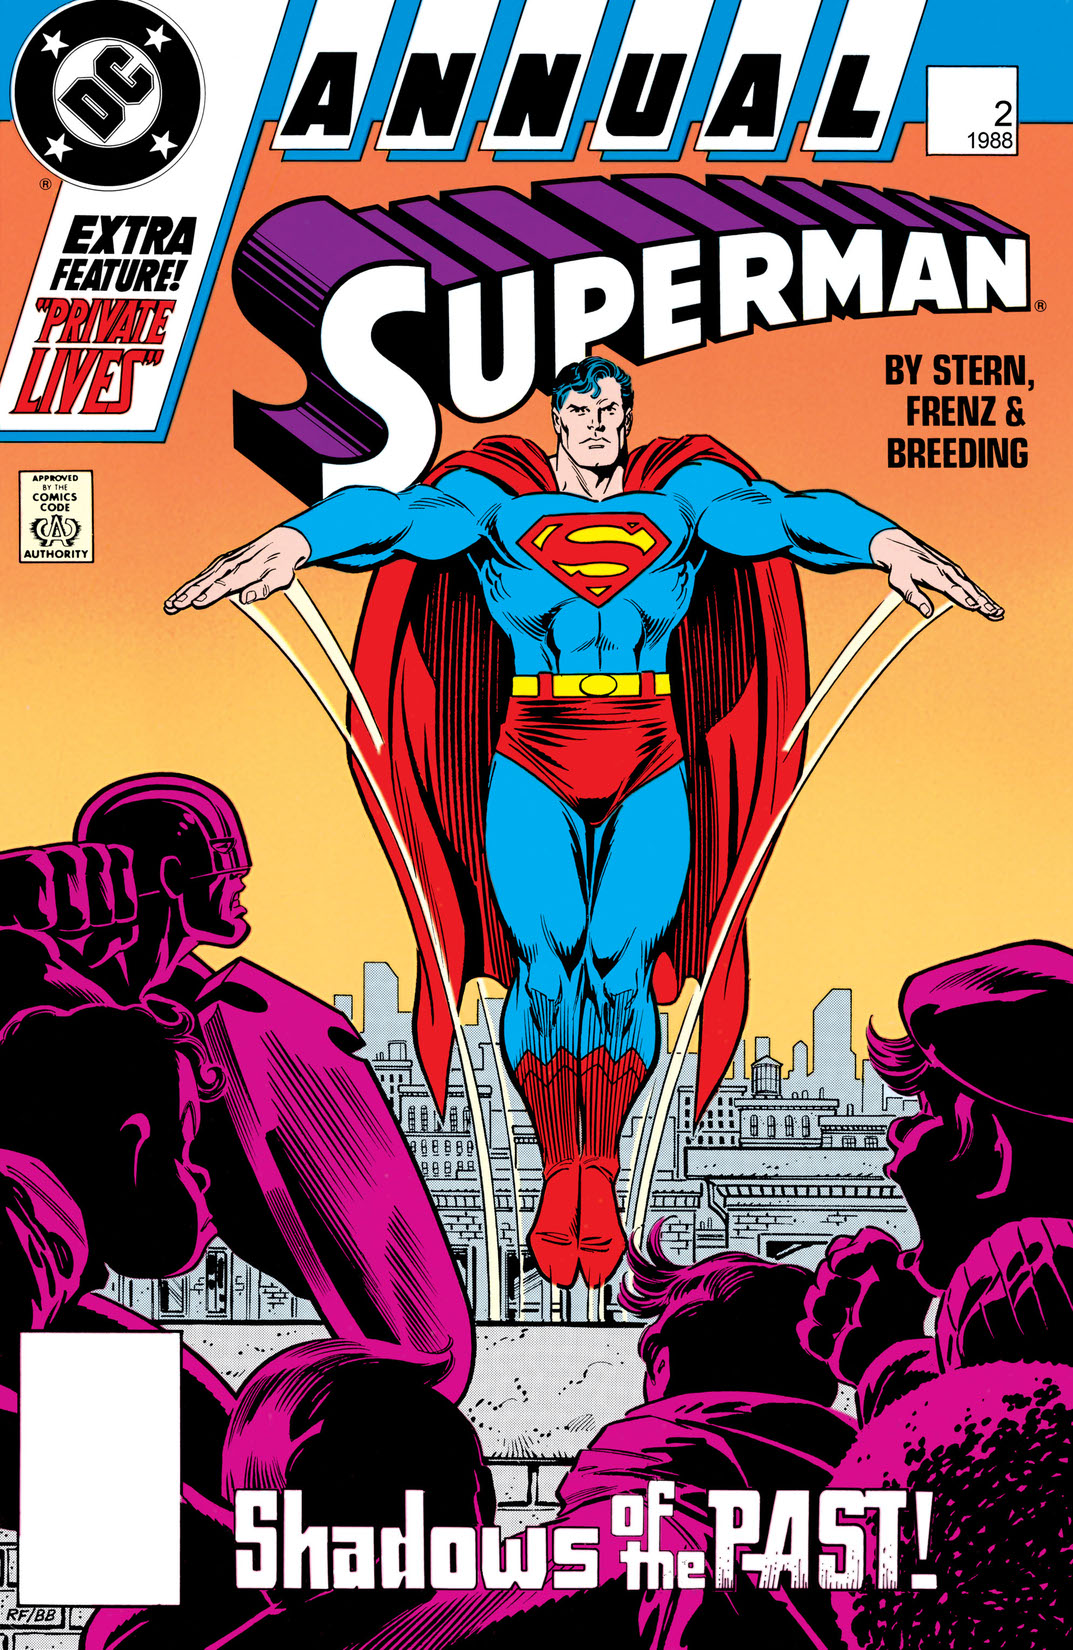 Superman Annual (1987-) #2 preview images